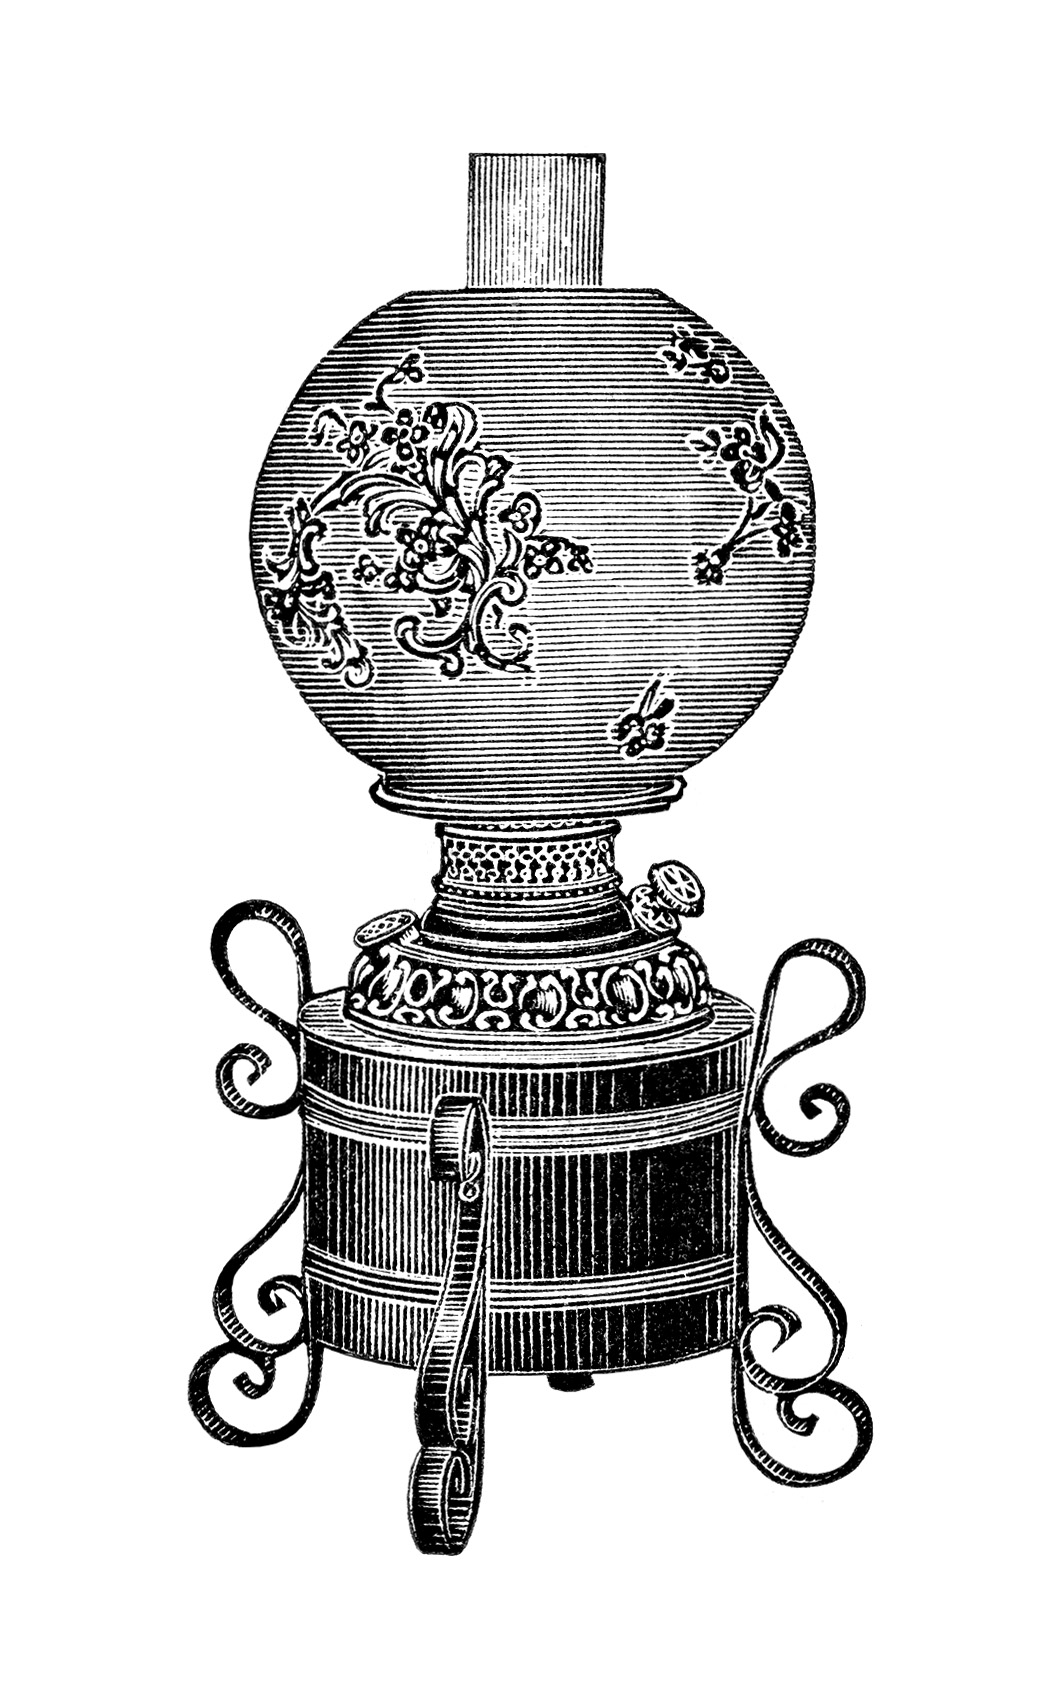 iron table lamp image, vintage lamp clipart, black and white clip art, Victorian lighting illustration, antique table lamp graphics